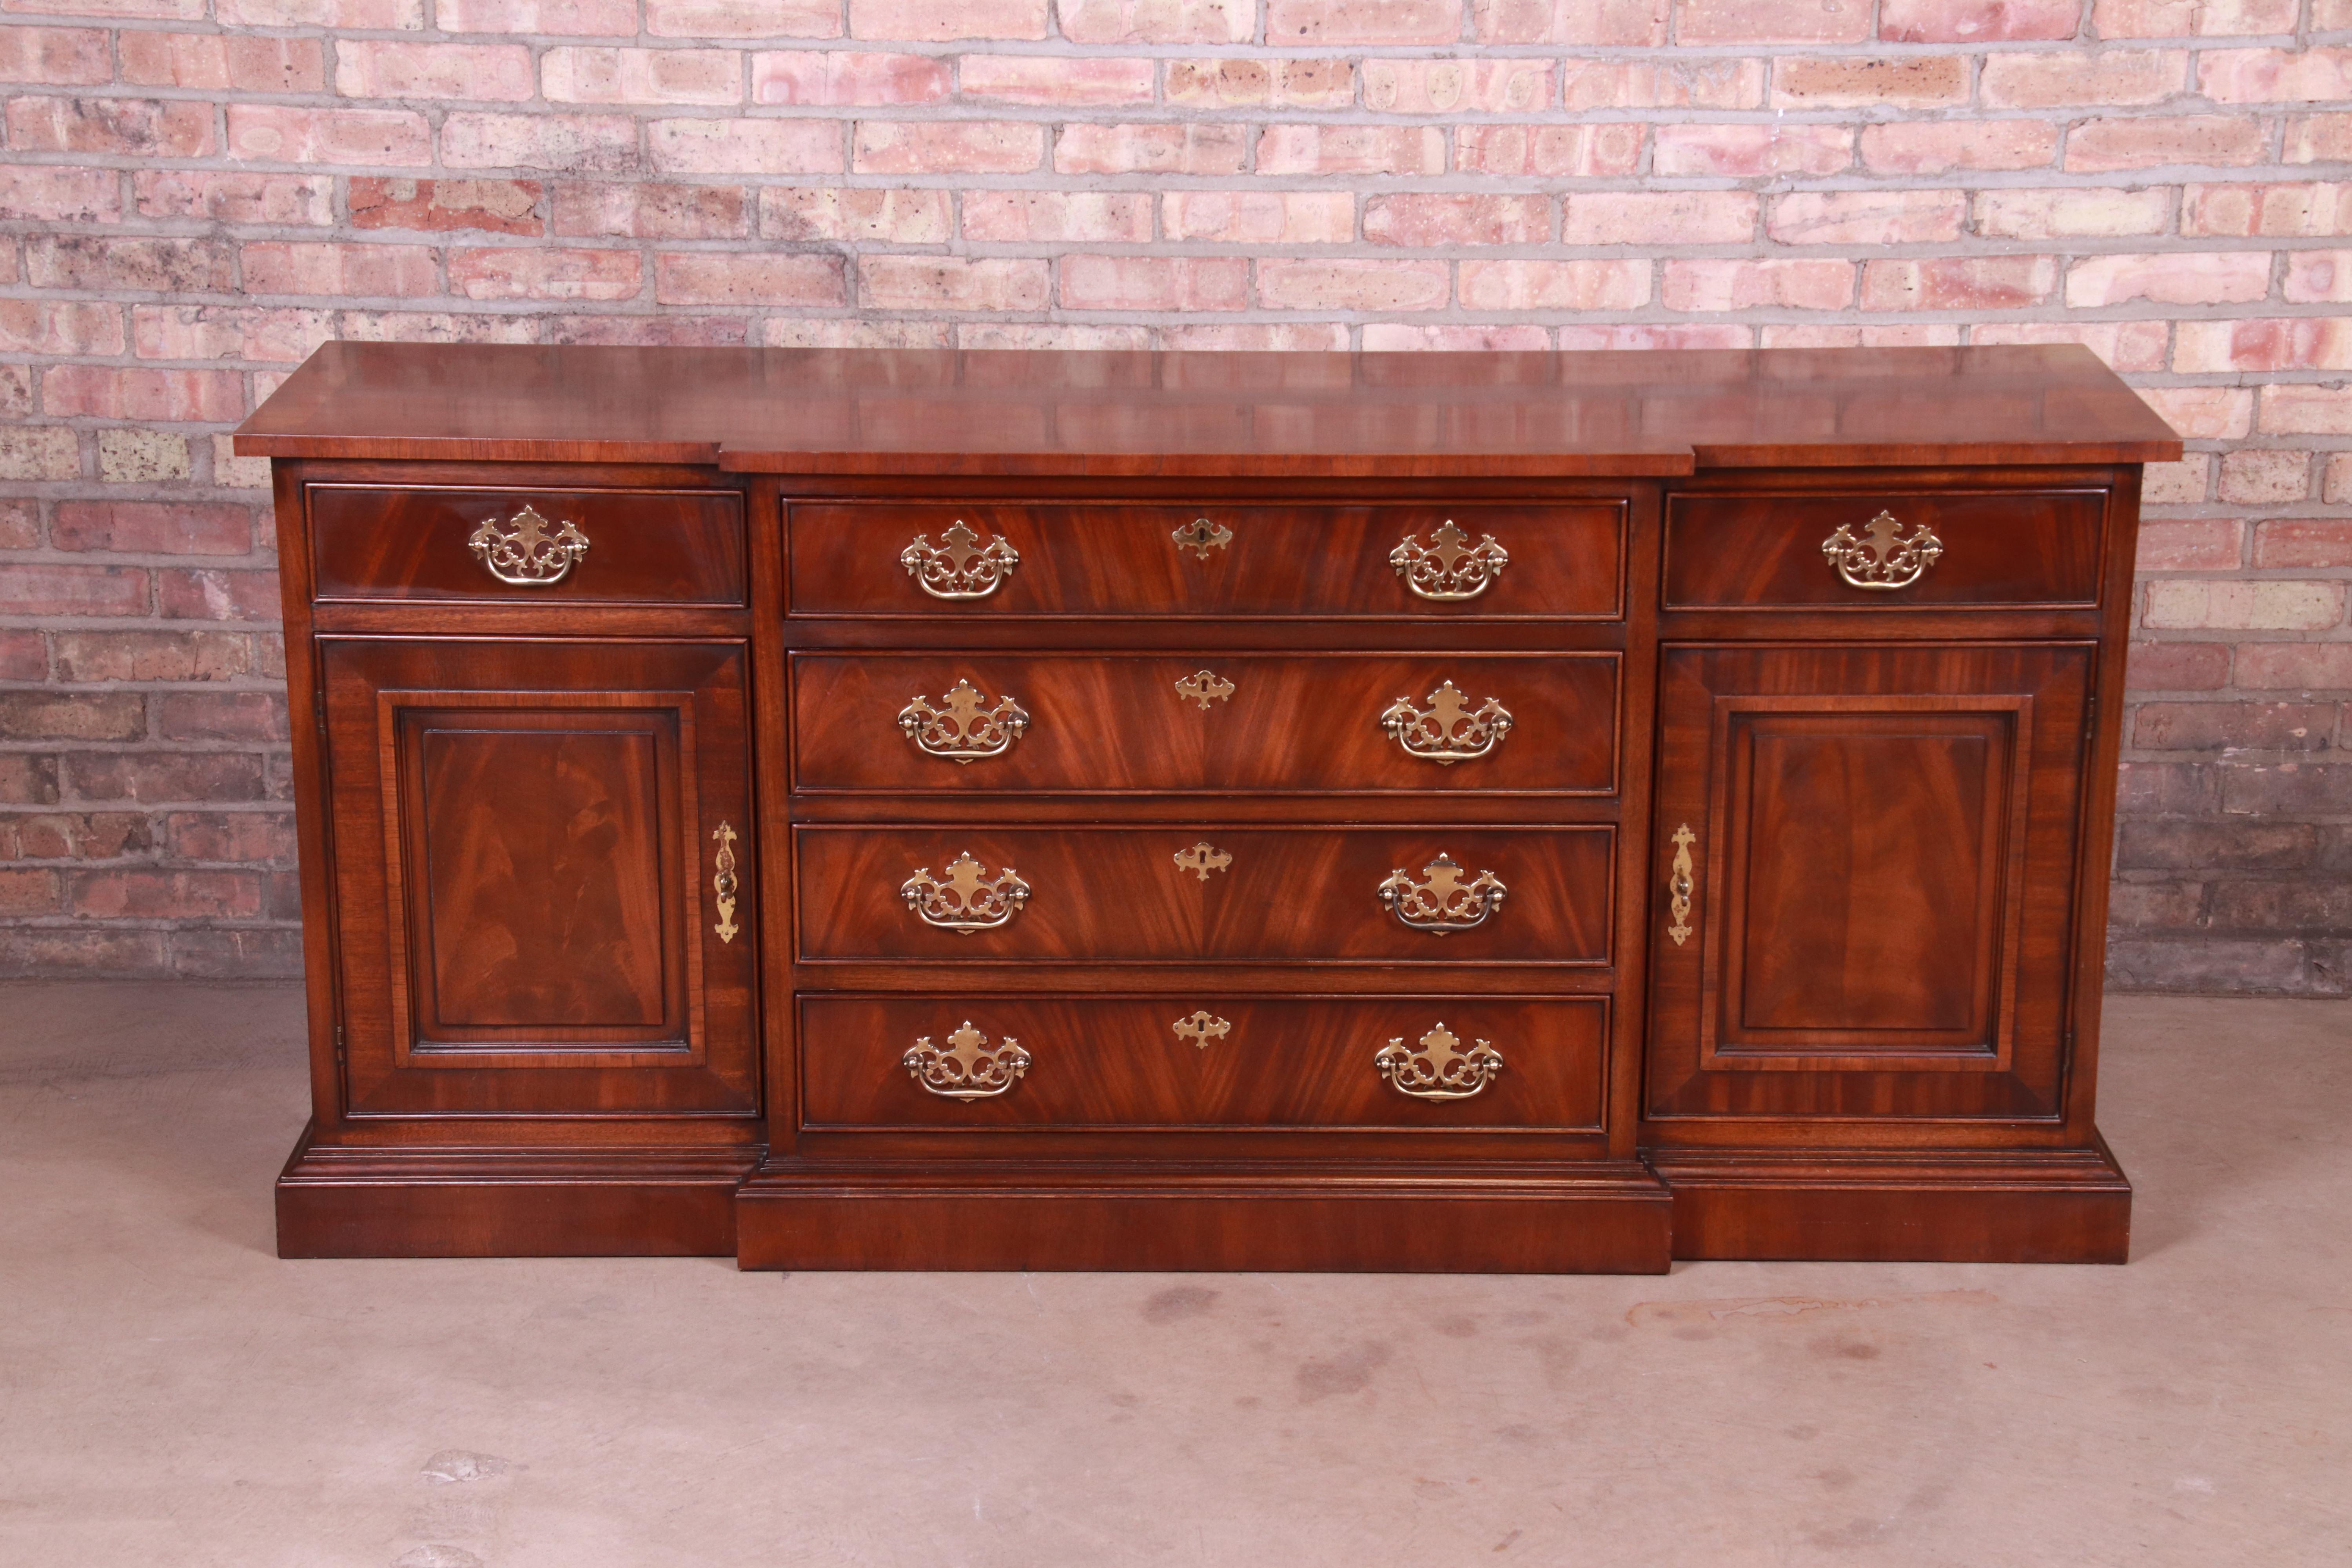 A gorgeous Chippendale style sideboard, credenza, or bar cabinet

By Drexel Furniture 